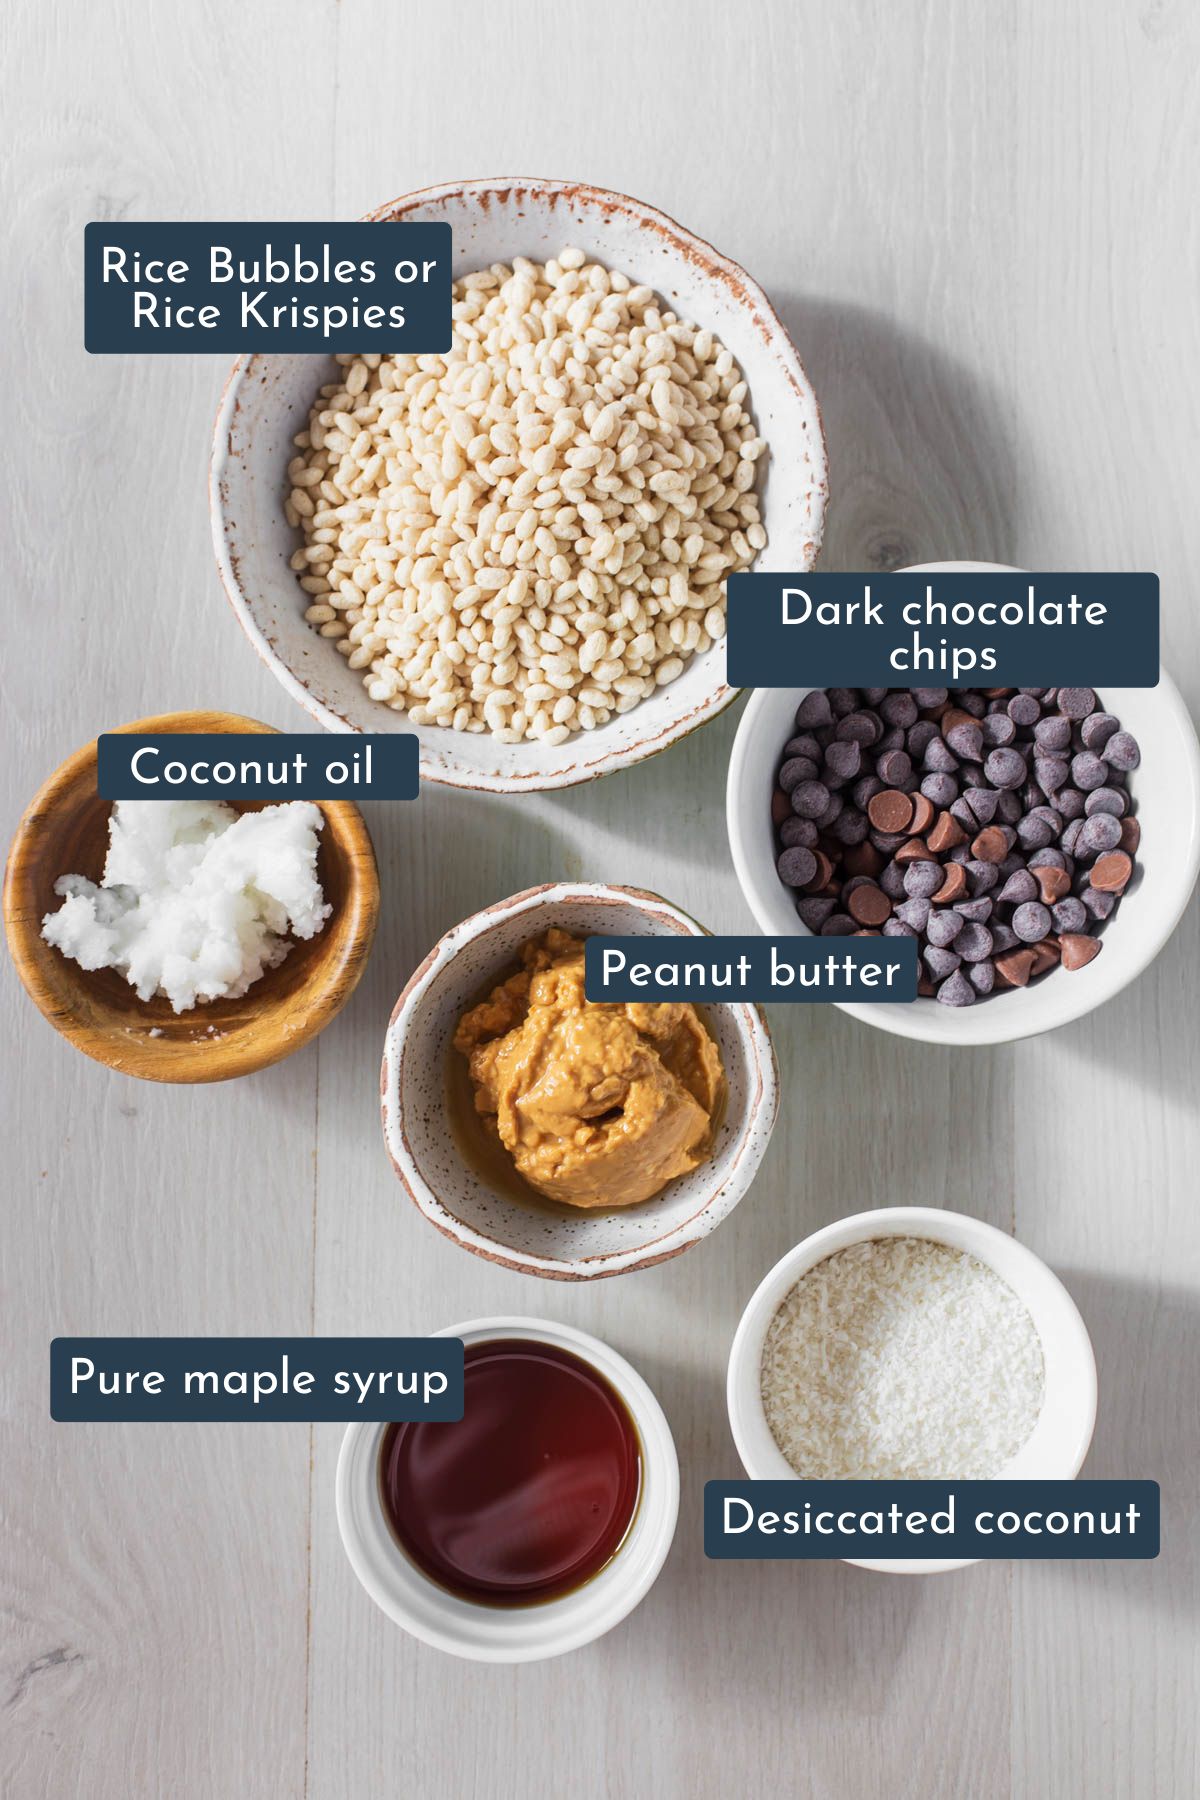 Ingredients to make peanut butter crunch bars are peanut butter, pure maple syrup, coconut oil, desiccated coconut, rice bubbles or rice krispies and dark chocolate chips